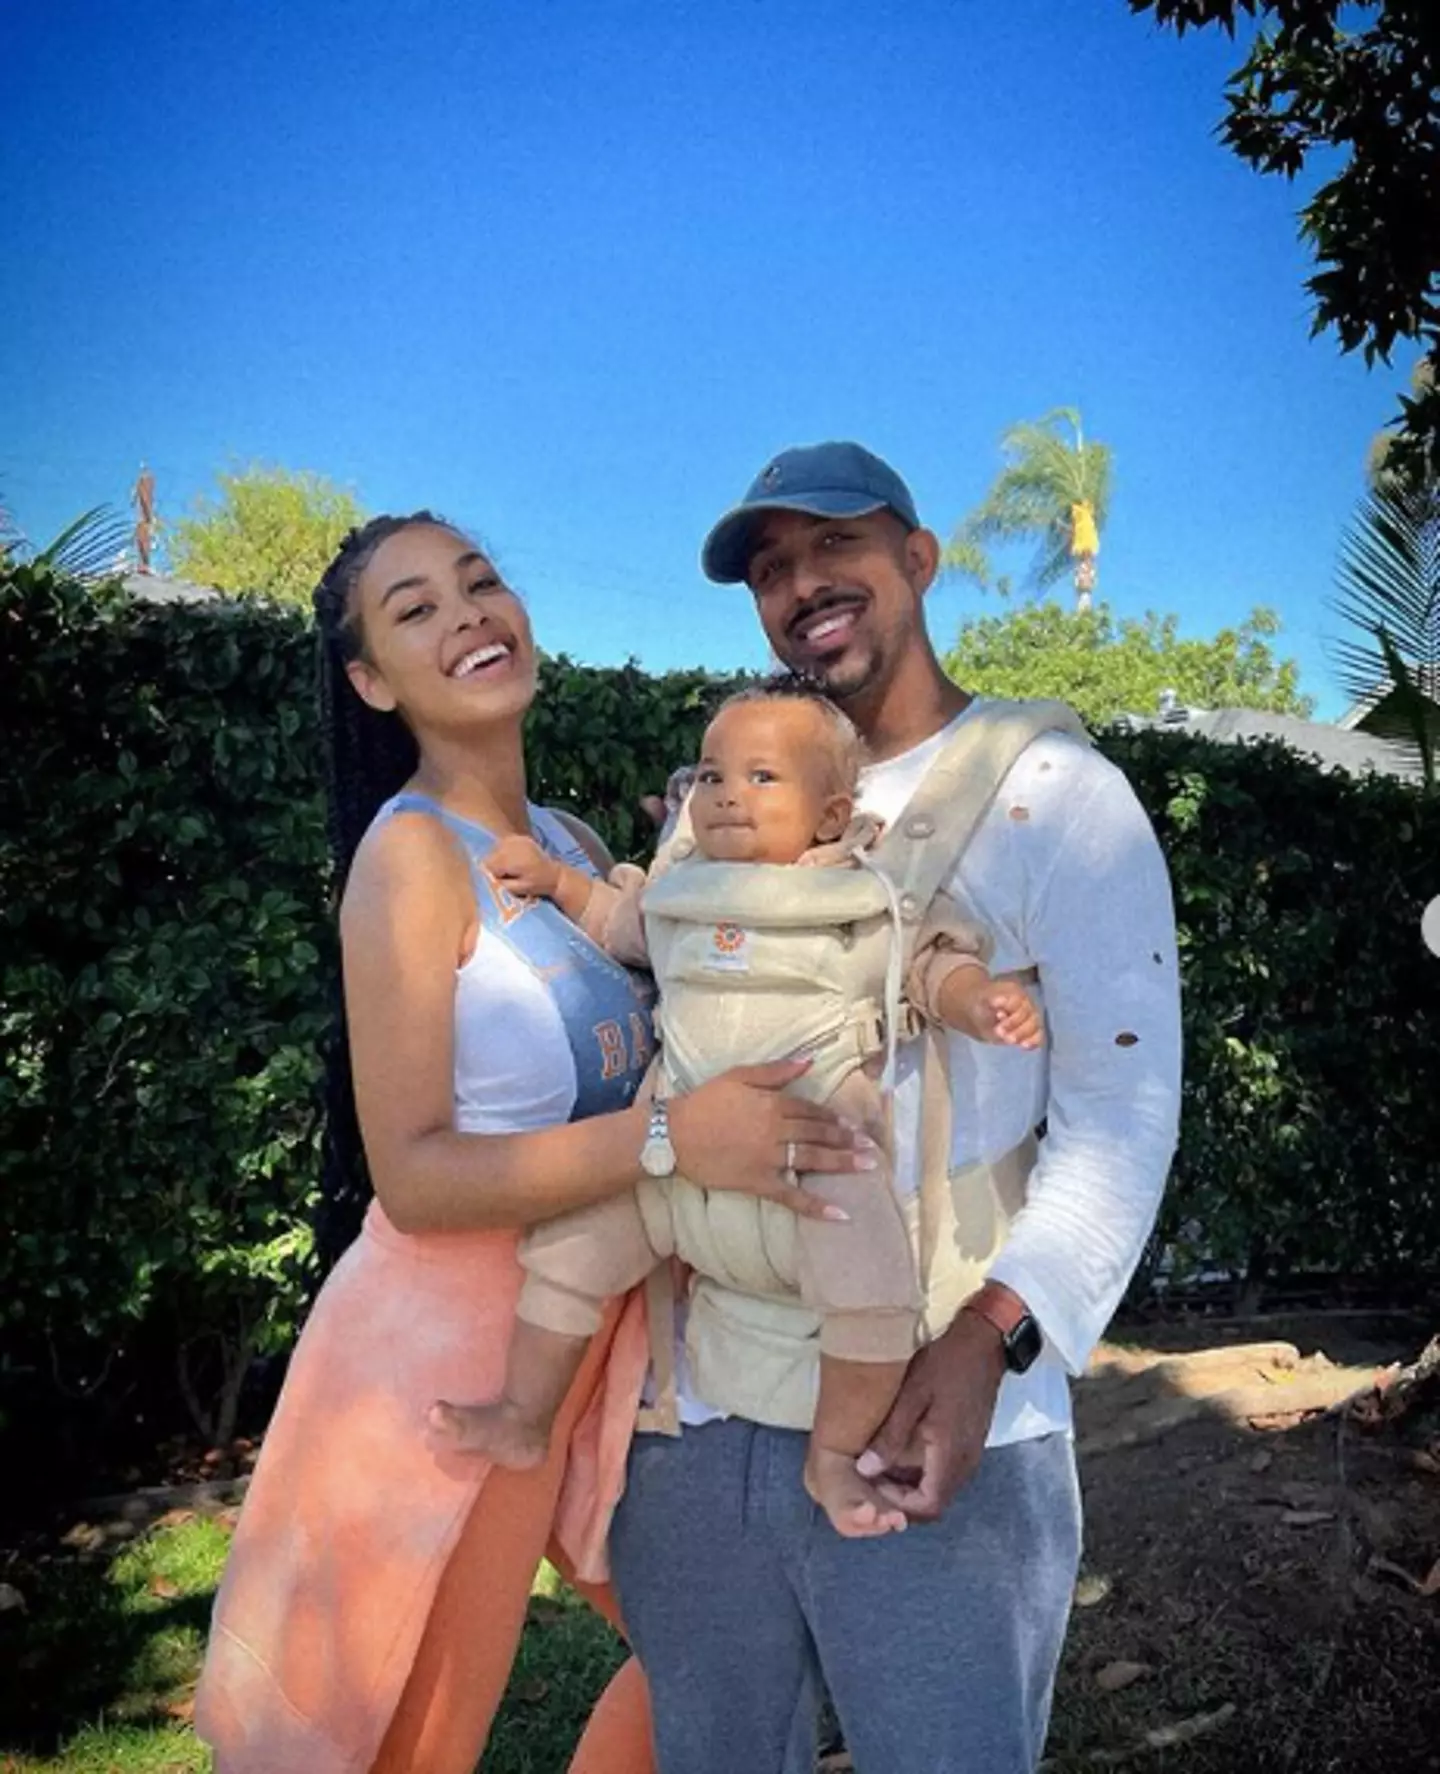 The pair welcomed their daughter together in 2021.